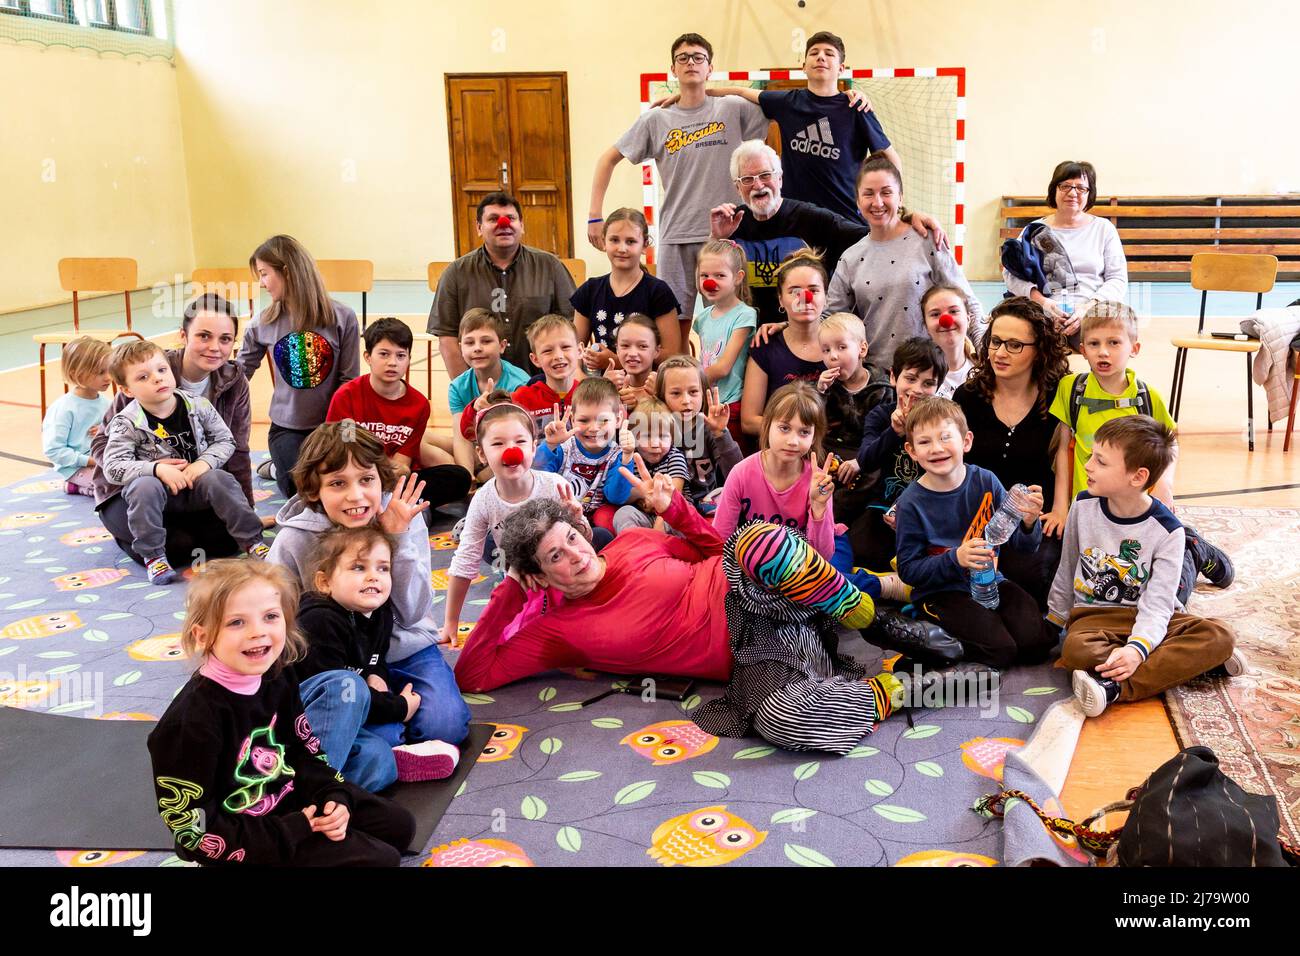 American magicians of Magician Without Borders, Tom Verner and Janet Fredericks pose with Ukrainian refugee children after their show at a humanitarian help centre in Korzkiew near Krakow. More than 3 million people have already fled Ukraine for Poland. Since the Russian Federation invaded Ukraine, the conflict forced 5.6 million Ukrainians to flee their country. The Polish population welcomed the refugees, offering their own homes as accommodation, Many individuals and NGOs provide humanitarian help. Stock Photo